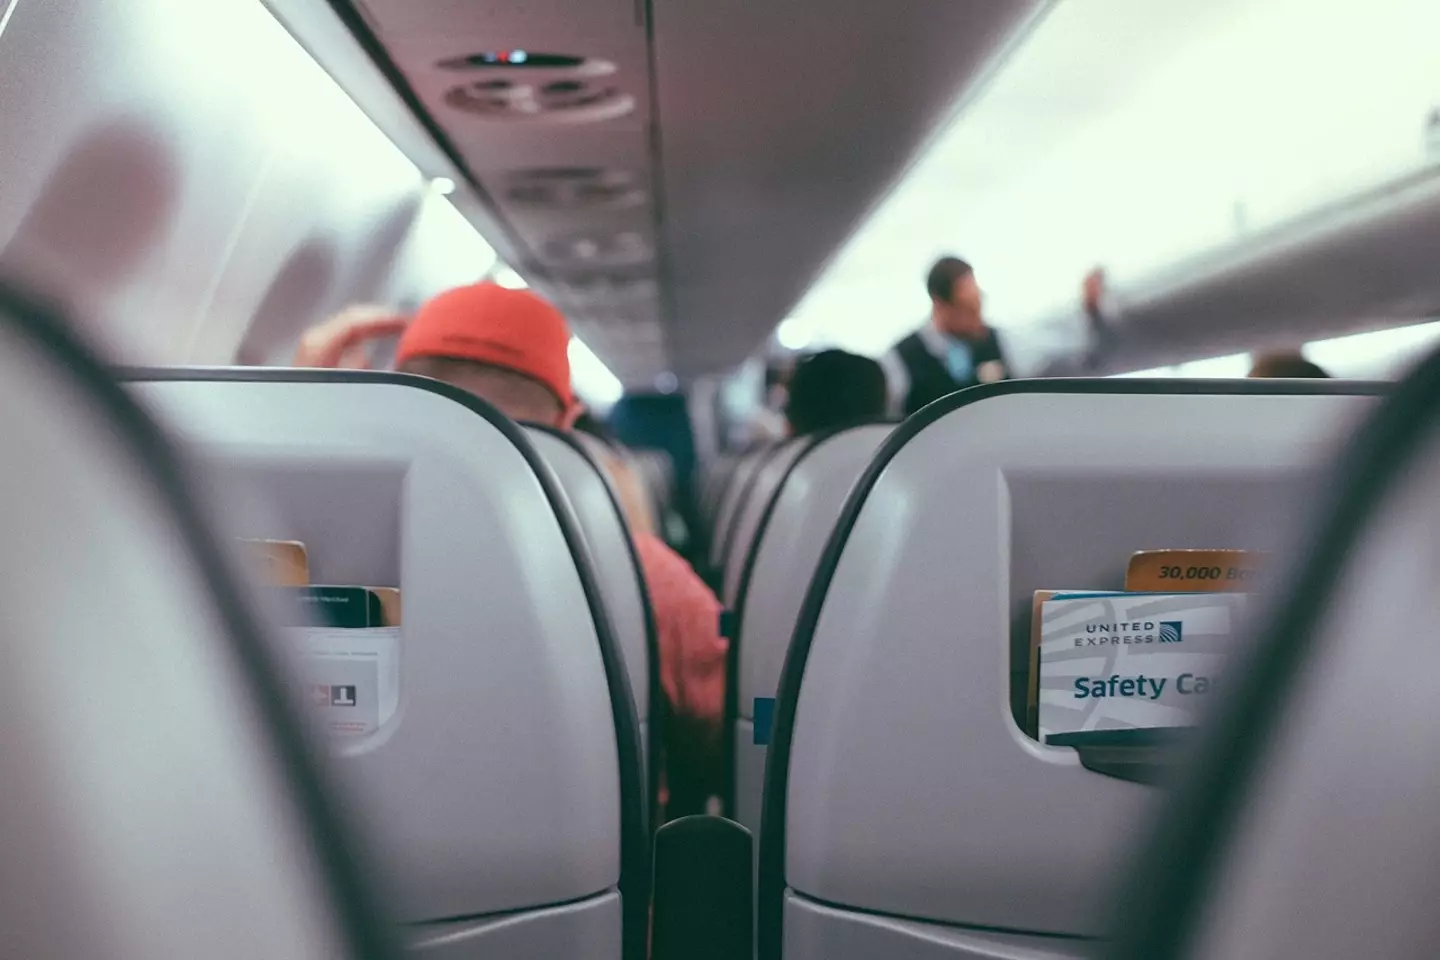 The gross habits of some passengers have been called out in a TikTok video.